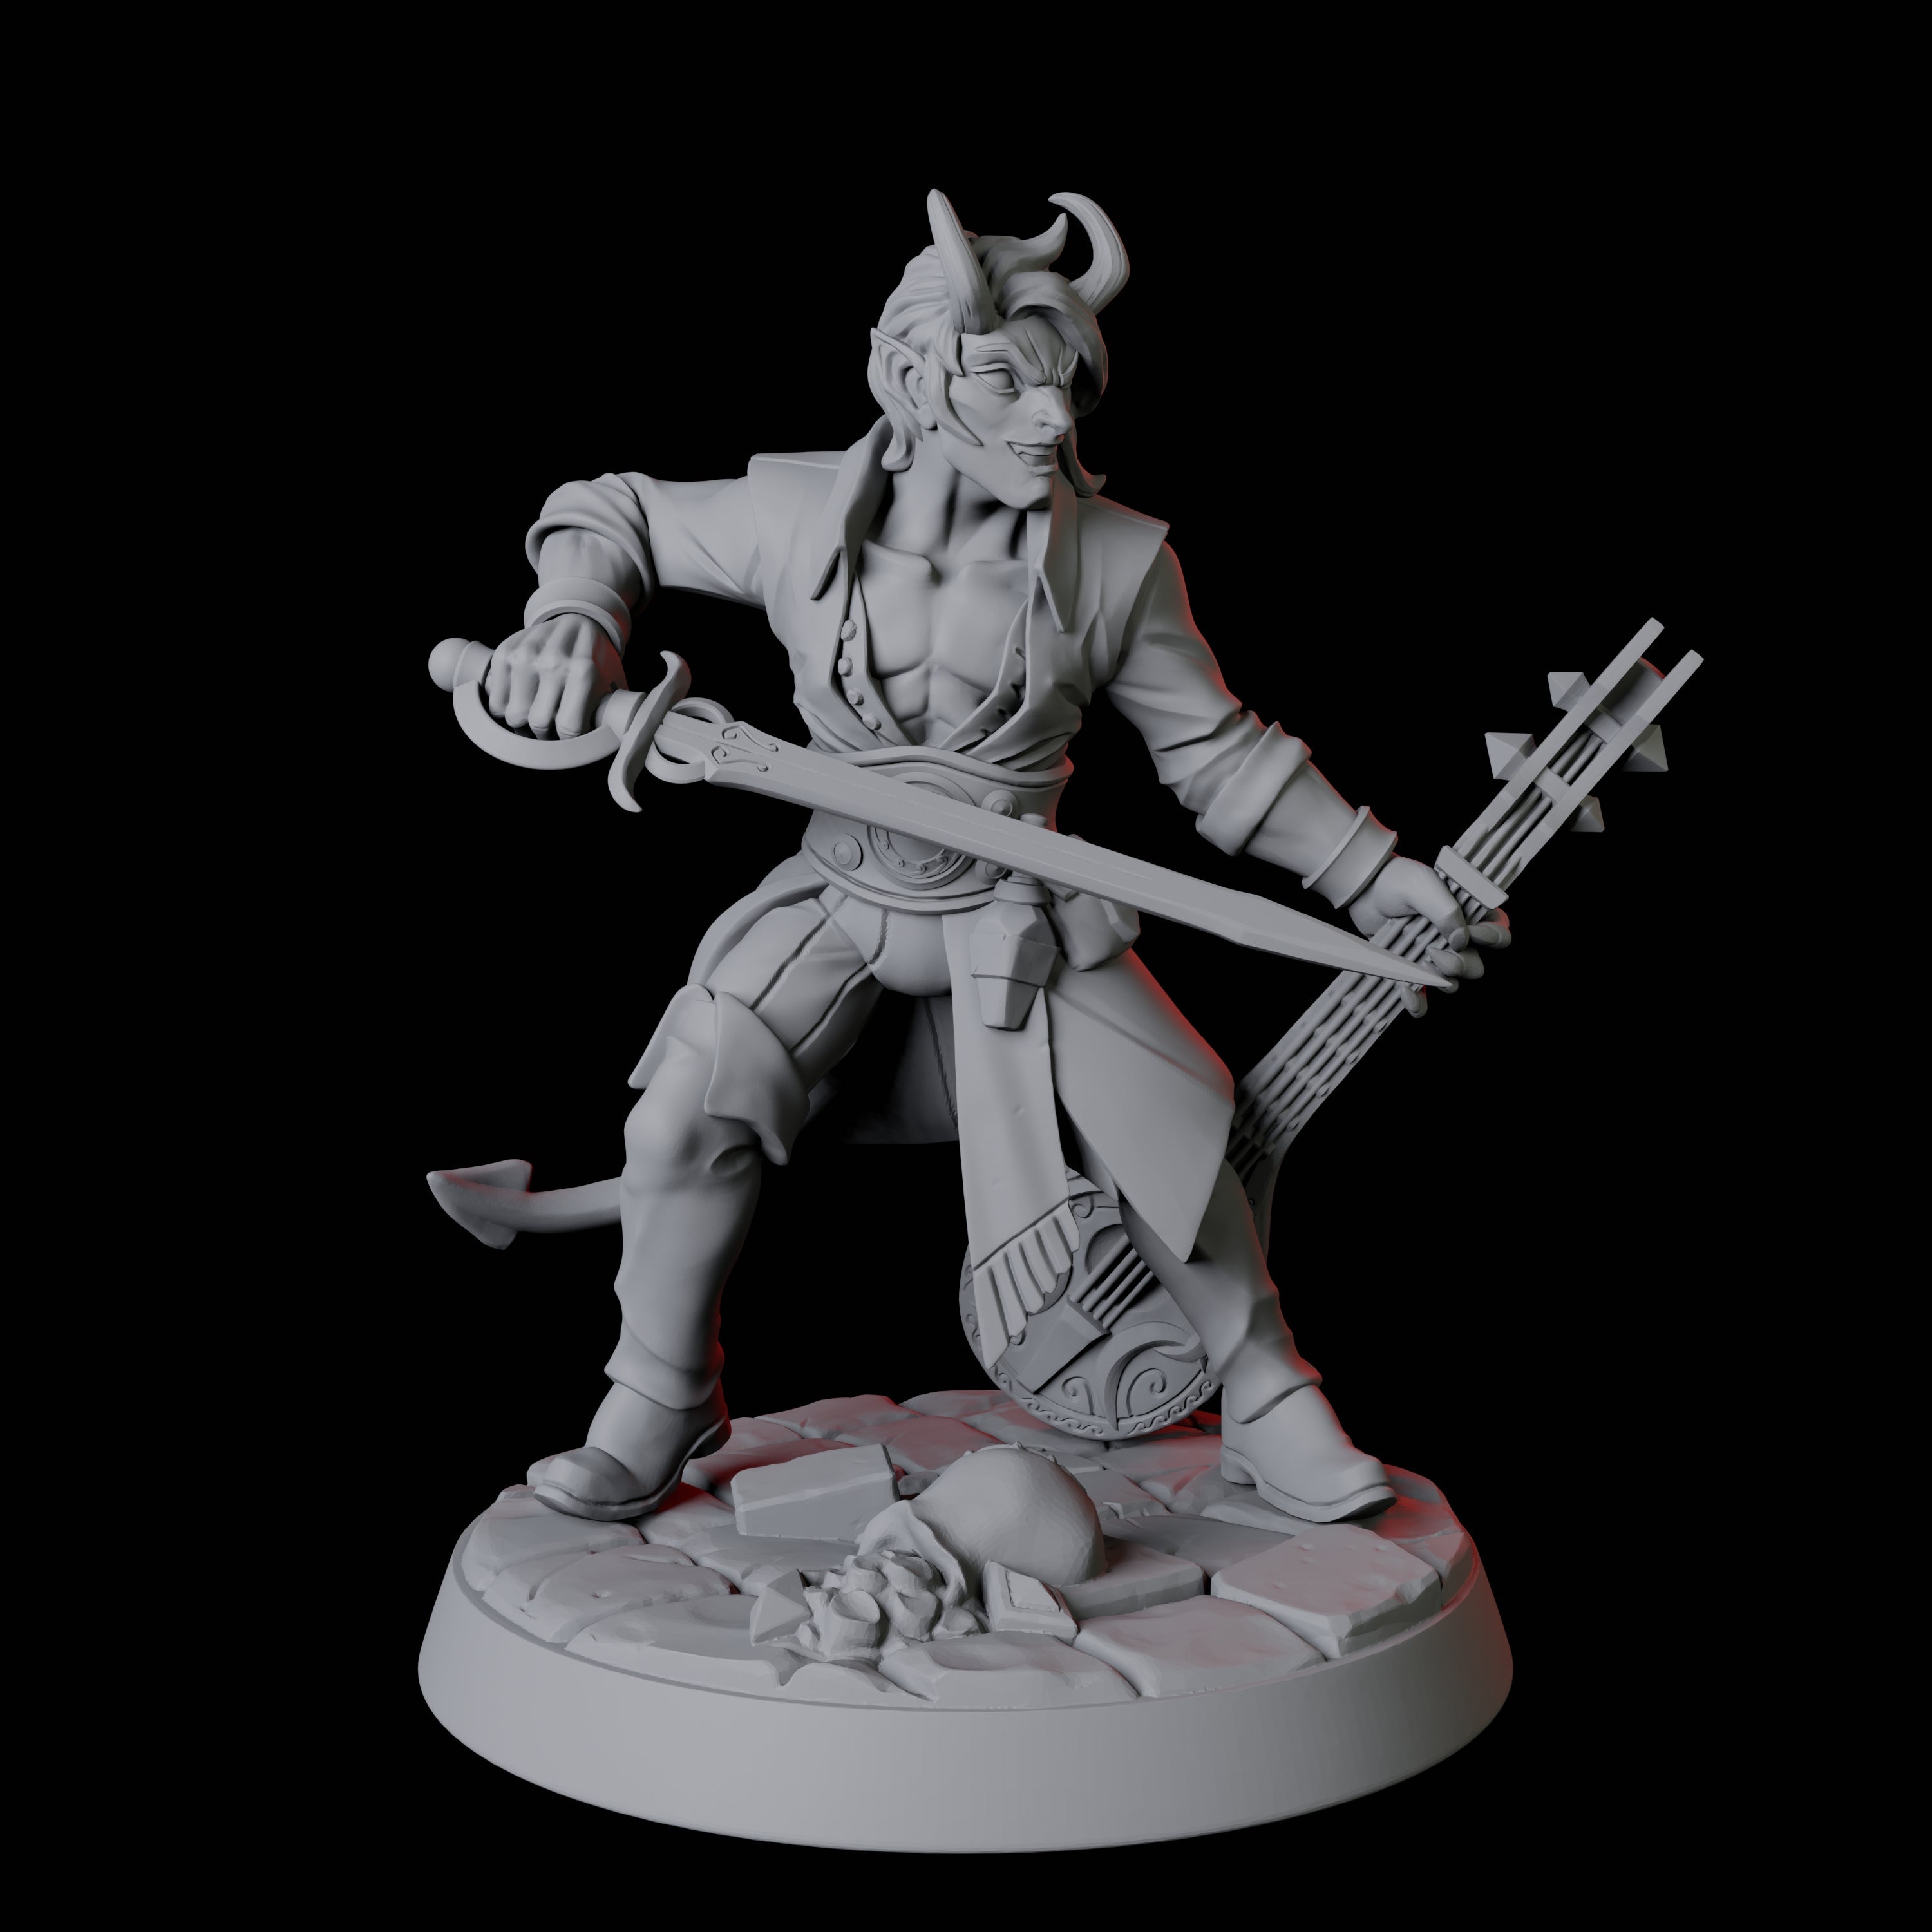 Six Tiefling Tricksters Miniature for Dungeons and Dragons, Pathfinder or other TTRPGs